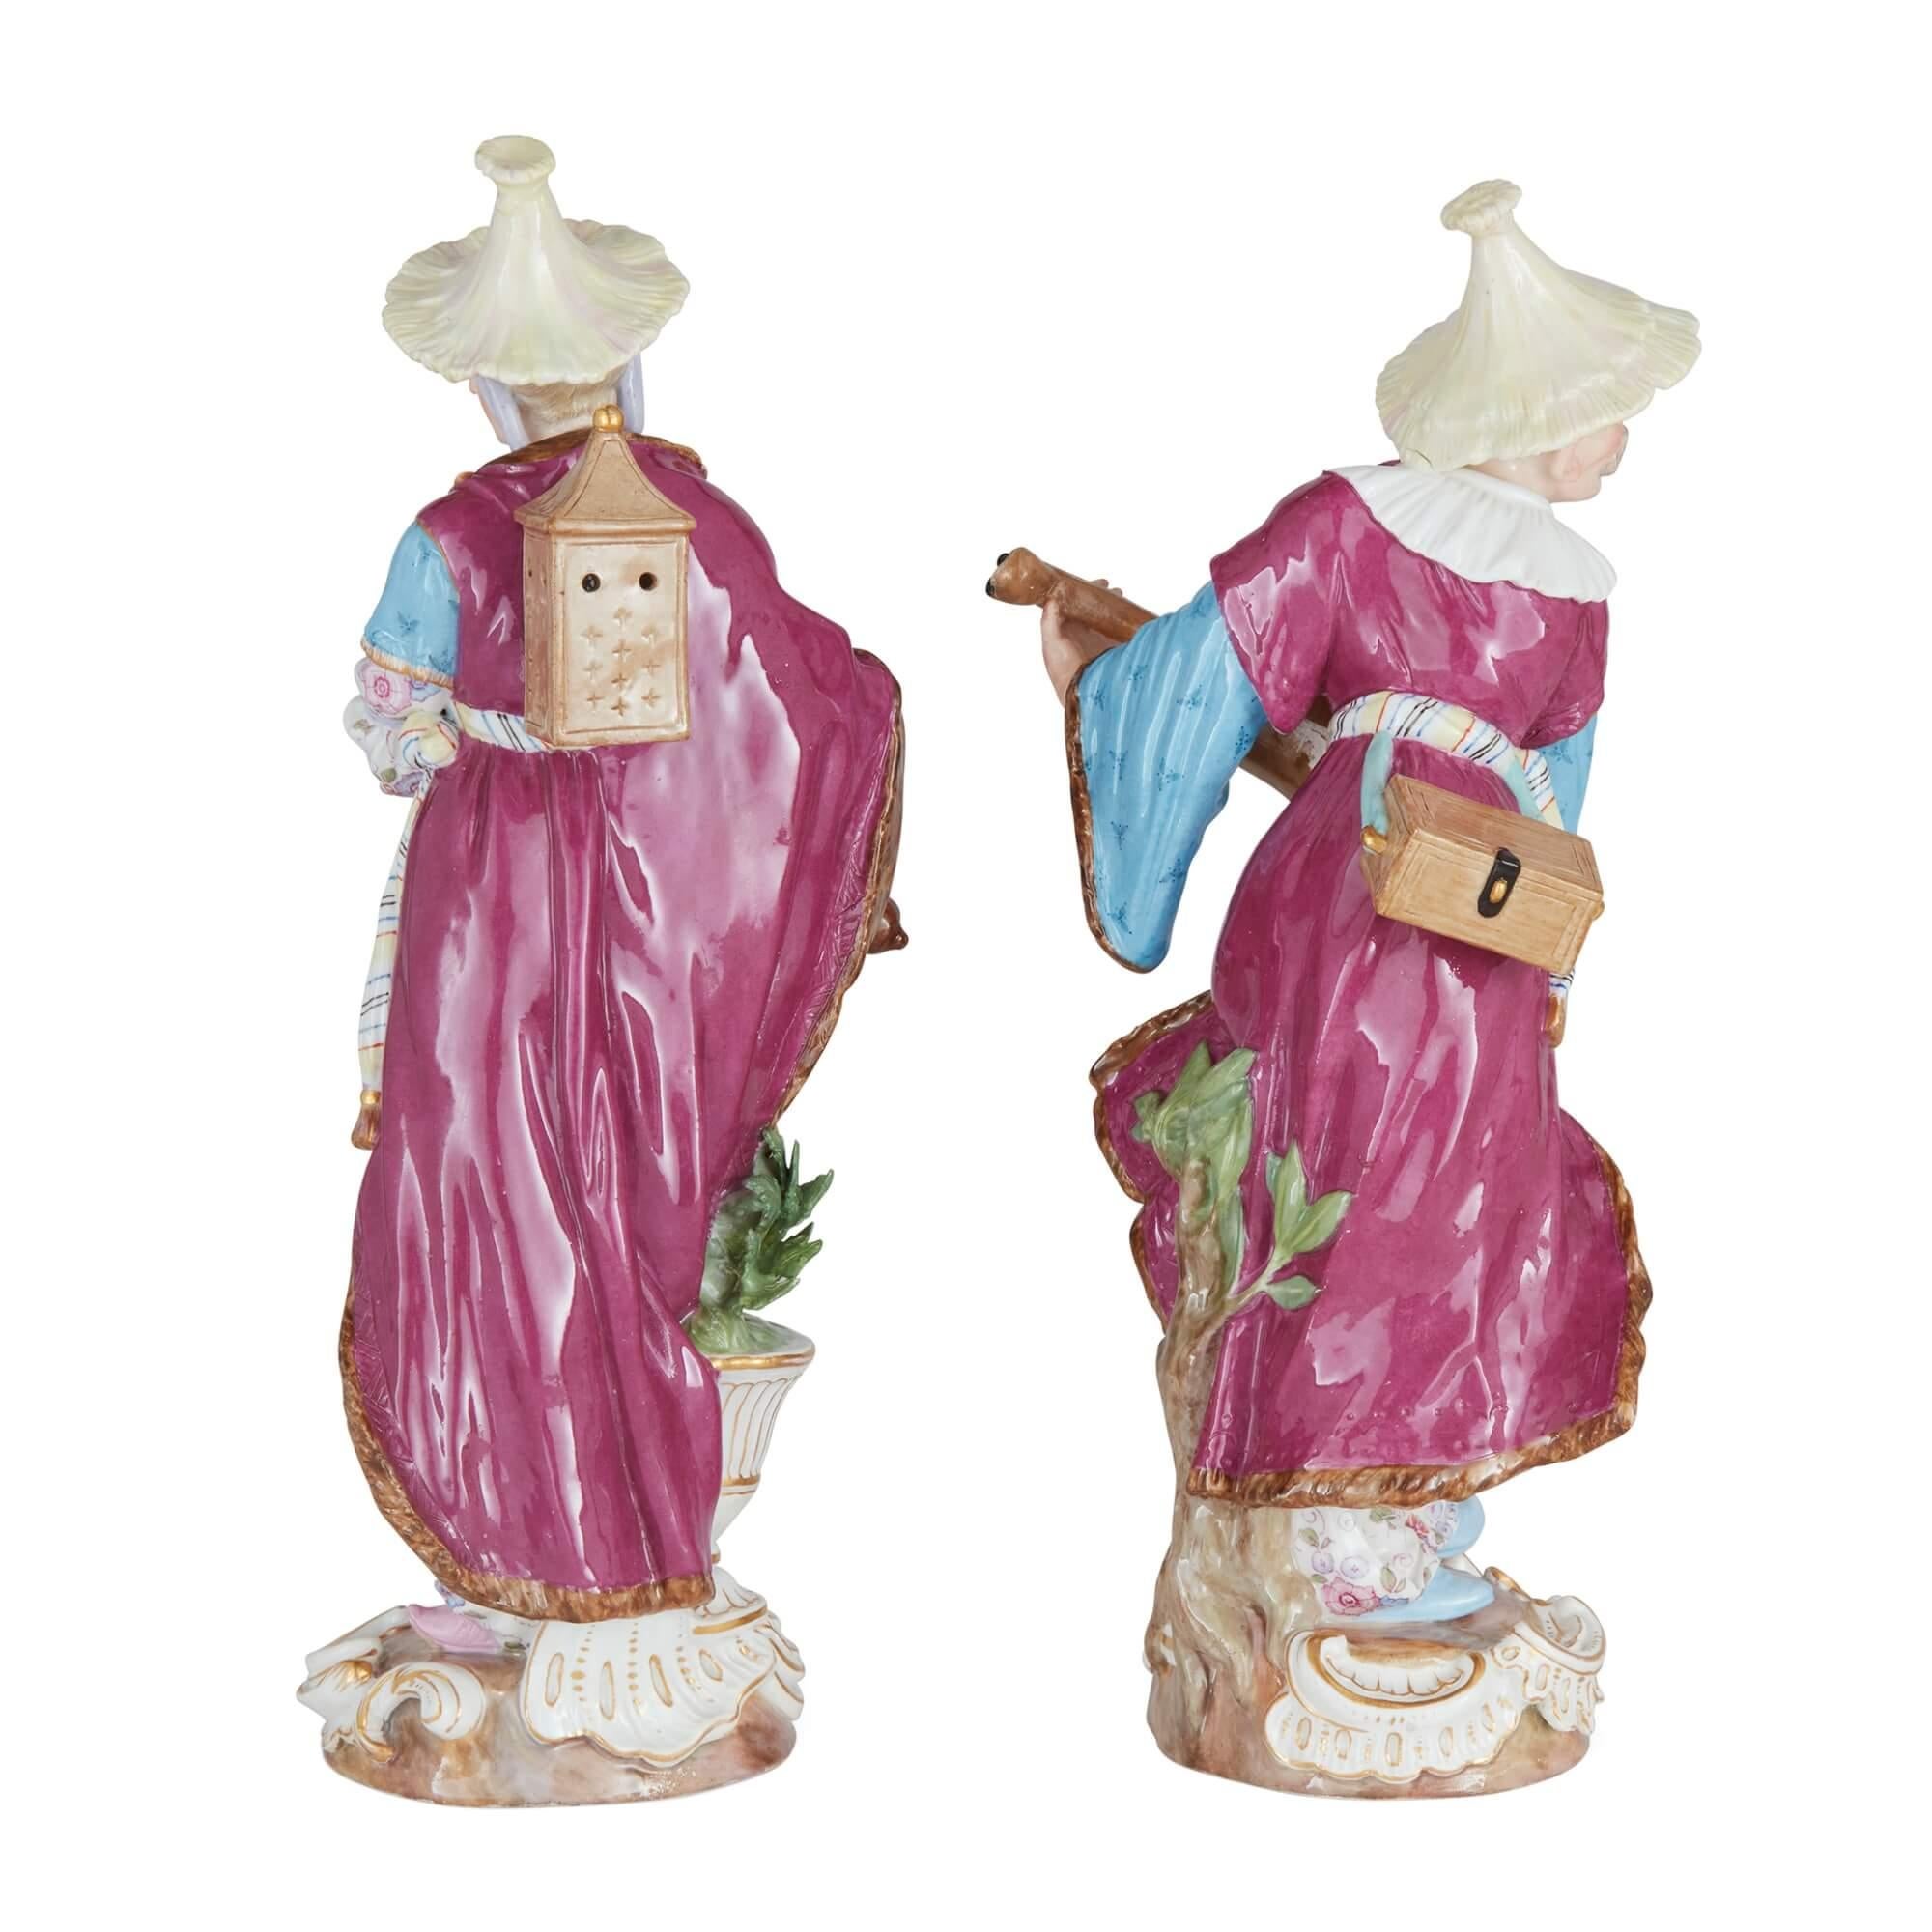 Pair of antique Meissen porcelain figures of Malabar musicians
German, Late 19th Century 
Woman: Height 33cm, width 13cm, depth 11cm
Man: Height 32cm, width 20cm, depth 11cm

Expertly crafted in the late 19th century by the artists at Meissen, the